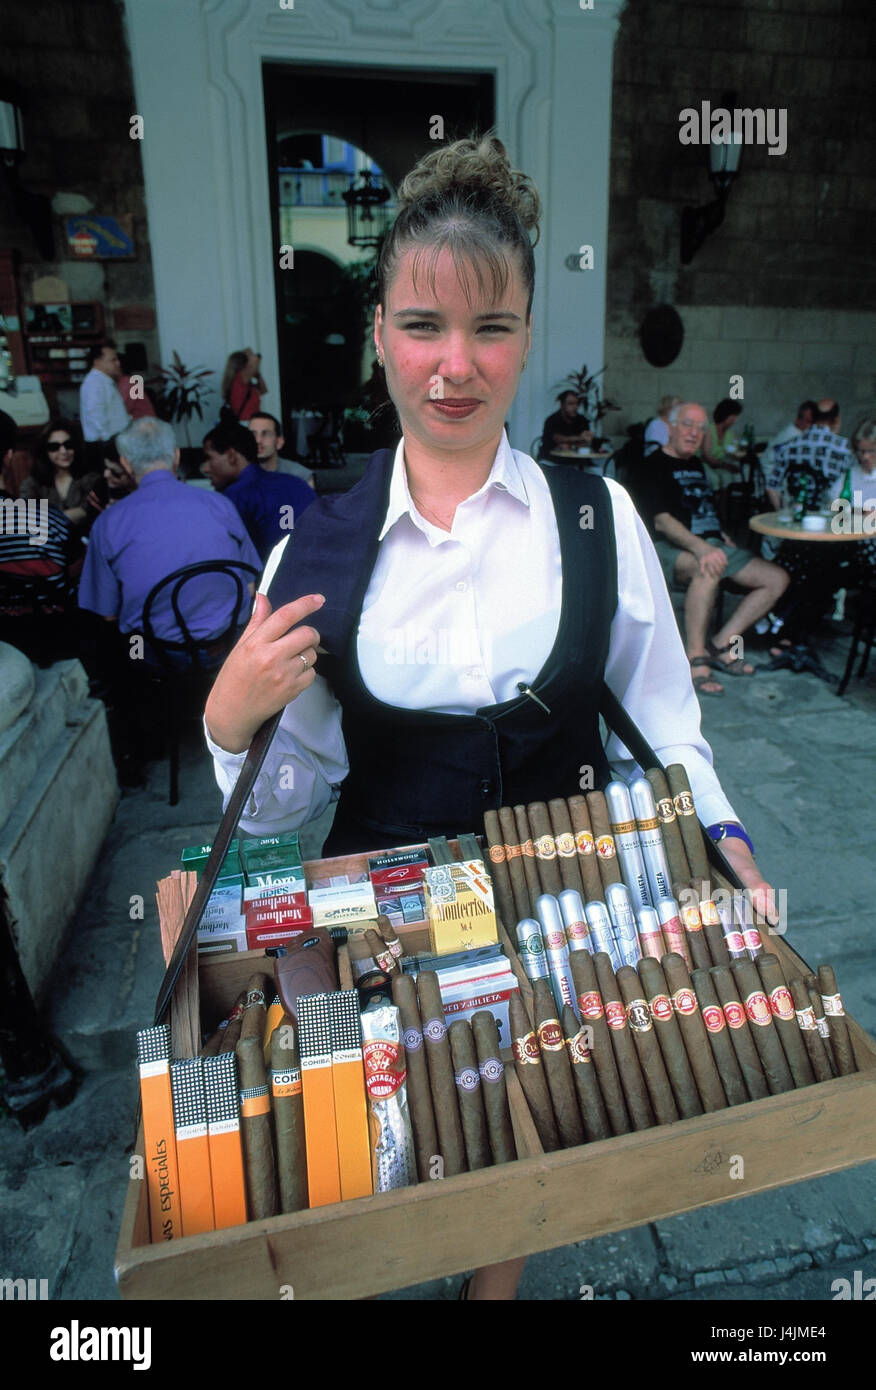 Cuba, Havana, street cafe, woman, vendor's tray, cigarettes, cigars, sales Central America, economy, sell, street sales, cigarette shop assistant, cigarette shop assistant, cigar shop assistant, cigar shop assistant, tobacco products, sorts, different, offer, choice, Havanas, outside Stock Photo